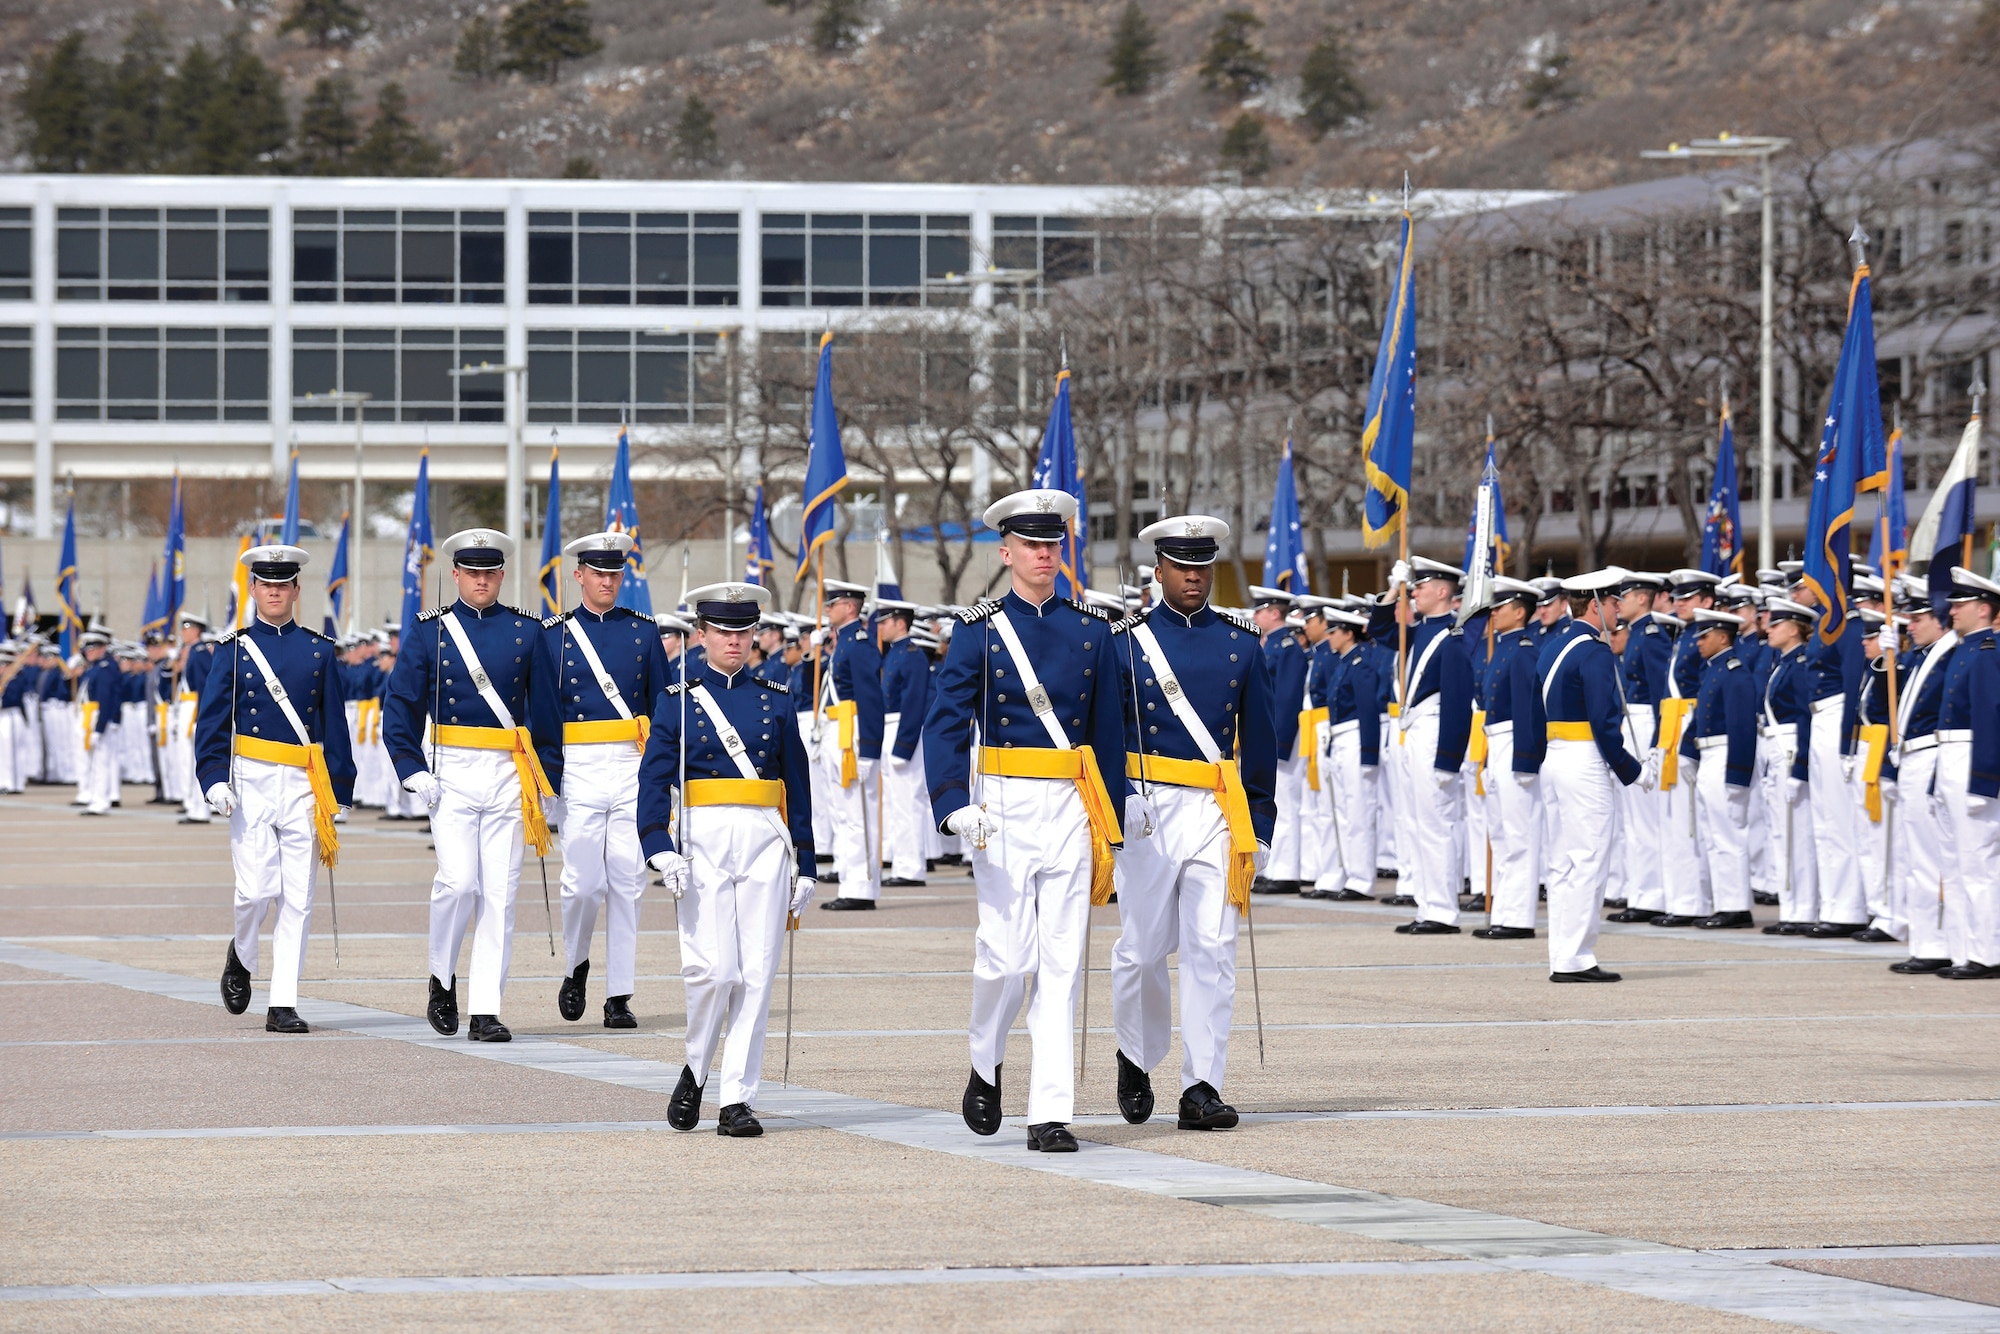 An end to an era: Concluding the Academy's 60th anniversary >United States Air Force Academy >Features” style=”clear:both; float:left; padding:10px 10px 10px 0px;border:0px; max-width: 310px;”> These depositories supply security features that embrace automatic re-locking, time locks, and monitoring for sound, motion, and vibrations. Total, never ignore security and velocity of entry in the case of discovering the ideal gold investment firm for your financial future. It’s sensible to seek the advice of with a financial skilled before reaching any closing choice. Investing in a Gold IRA can be a wise transfer for those in search of to diversify their retirement portfolio and protect their wealth. Gold IRAs are a superb option to diversify your investment portfolio and protect yourself from inflation and economic downturns. This requirement encompasses varied varieties of tax-deferred retirement funds, together with conventional IRAs.</p>
<p> What sorts of IRAs can younger adults spend money on? That is in comparison to a conventional IRA account wherein traders could also be restricted to conventional investments resembling stocks, bonds and mutual funds. Any unintended withdrawal might be treated as a taxable distribution and could additionally carry with it potential early withdrawal penalties. The amenities carry excess insurance coverage policies from main global insurers like Travelers and Lloyd’s of London. Canada, and storage comes with a Lloyd’s of London insurance coverage. By no means make a decision until you’ve thought of each charge and coverage that can inevitably turn out to be hooked up to your account. Earlier than making any investment, ensure you check out the company’s gold IRA guide, as a result of it’s meant for the long-time period and you want to understand how it really works. Roth IRAs are a superb choice for young adults because at this level in your life you’re probably in a lower tax bracket (discover out your bracket right here) than you may be while you retire. Greater than two decades in business. Imagine making sound financial selections and saving diligently for decades… Every coin is fastidiously selected for its high quality, purity, and historical significance, making Goldco a trusted supply for acquiring both precious metals industry and steel coins.</p>

			<p class=